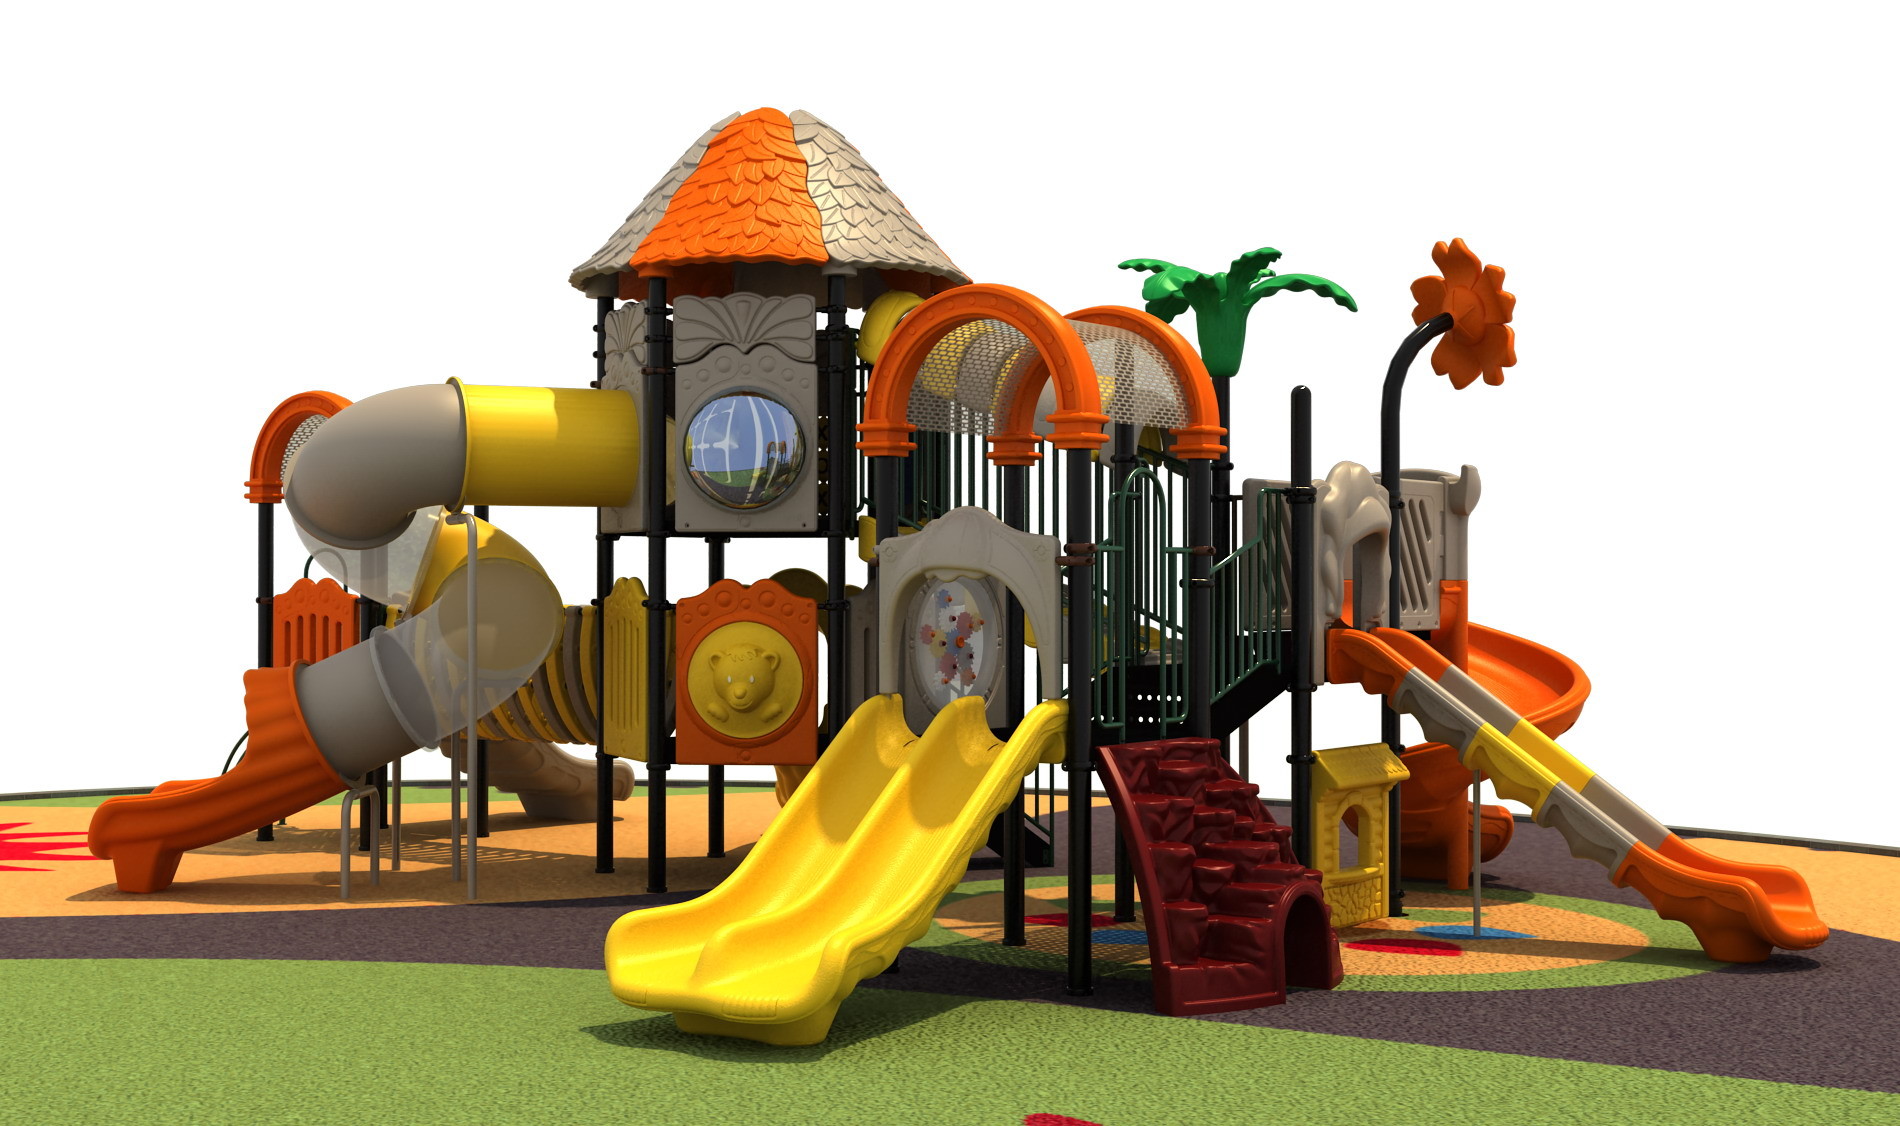 Quality Qitele factory price kids outdoor playground equipment commercial play set for amusement park,school,kindergarten for sale